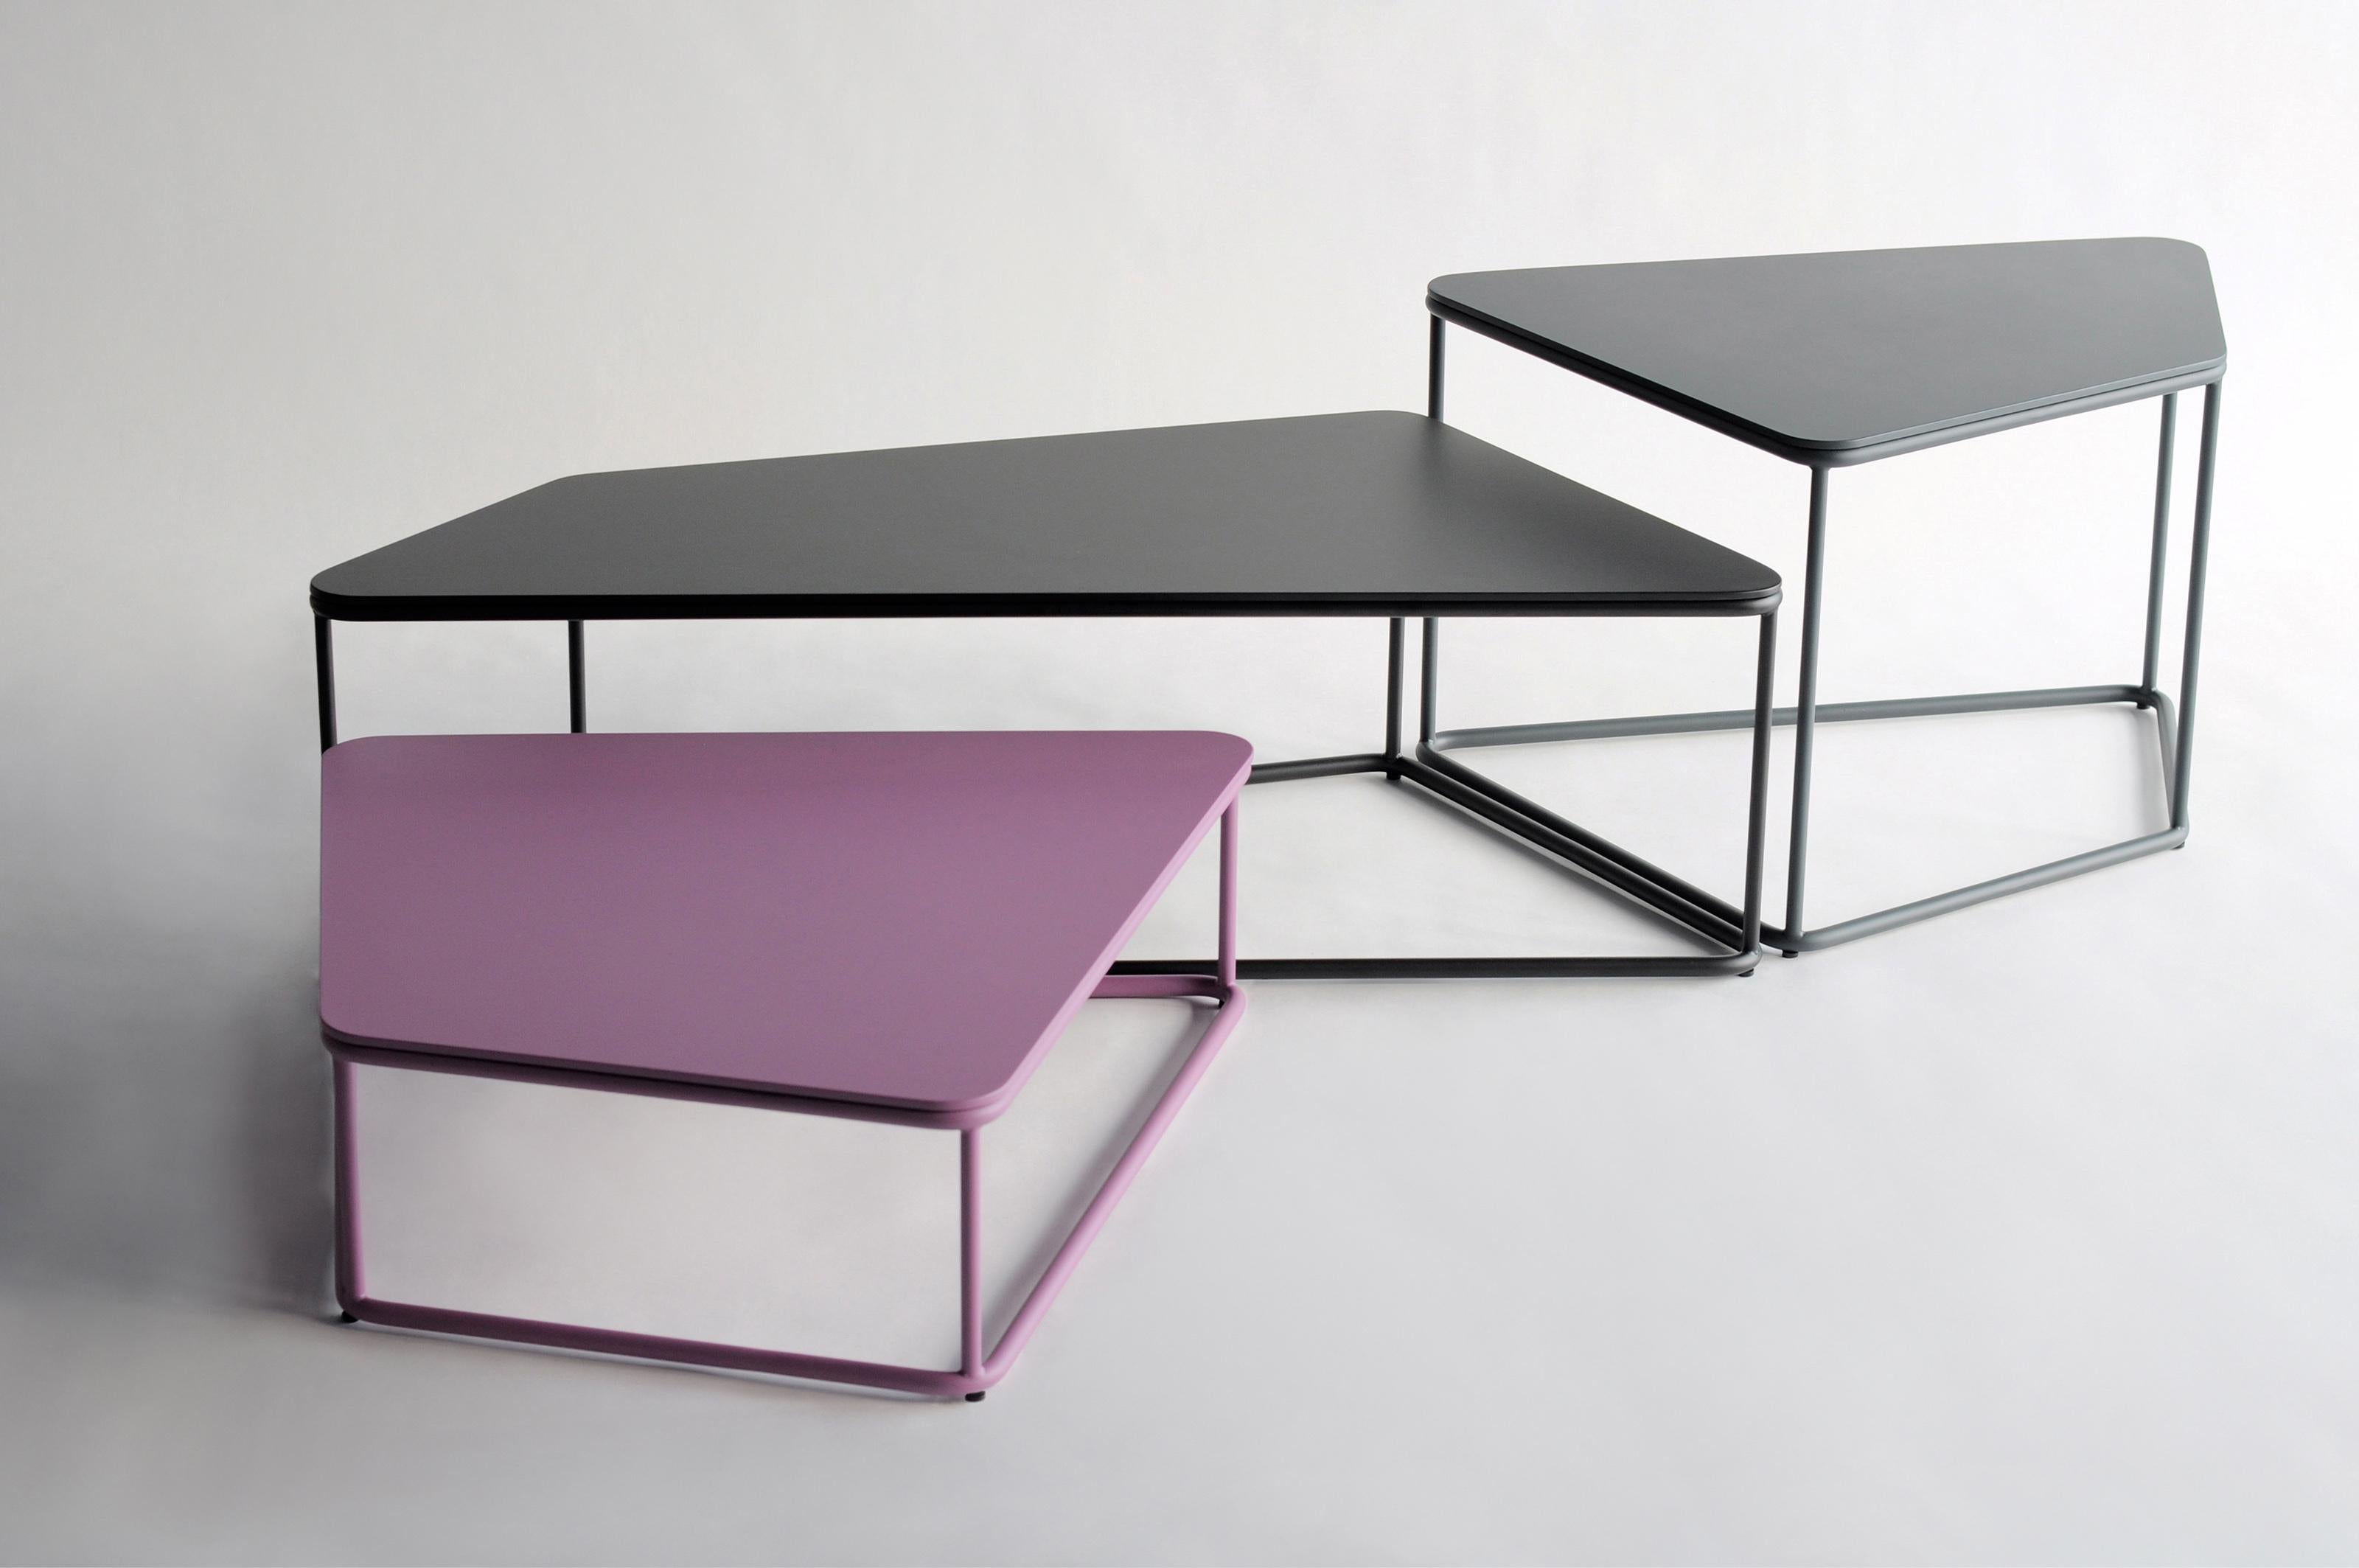 Set Of 3 Pangaea Tables by Phase Design
Dimensions: D 85.7 x W 129.5 x H 40.6 cm. 
Materials: Powder-coated steel.

Solid steel bar and plate. Steel is available in gloss or flat white, black, gray, purple, or yellow powder coat. Powder coat